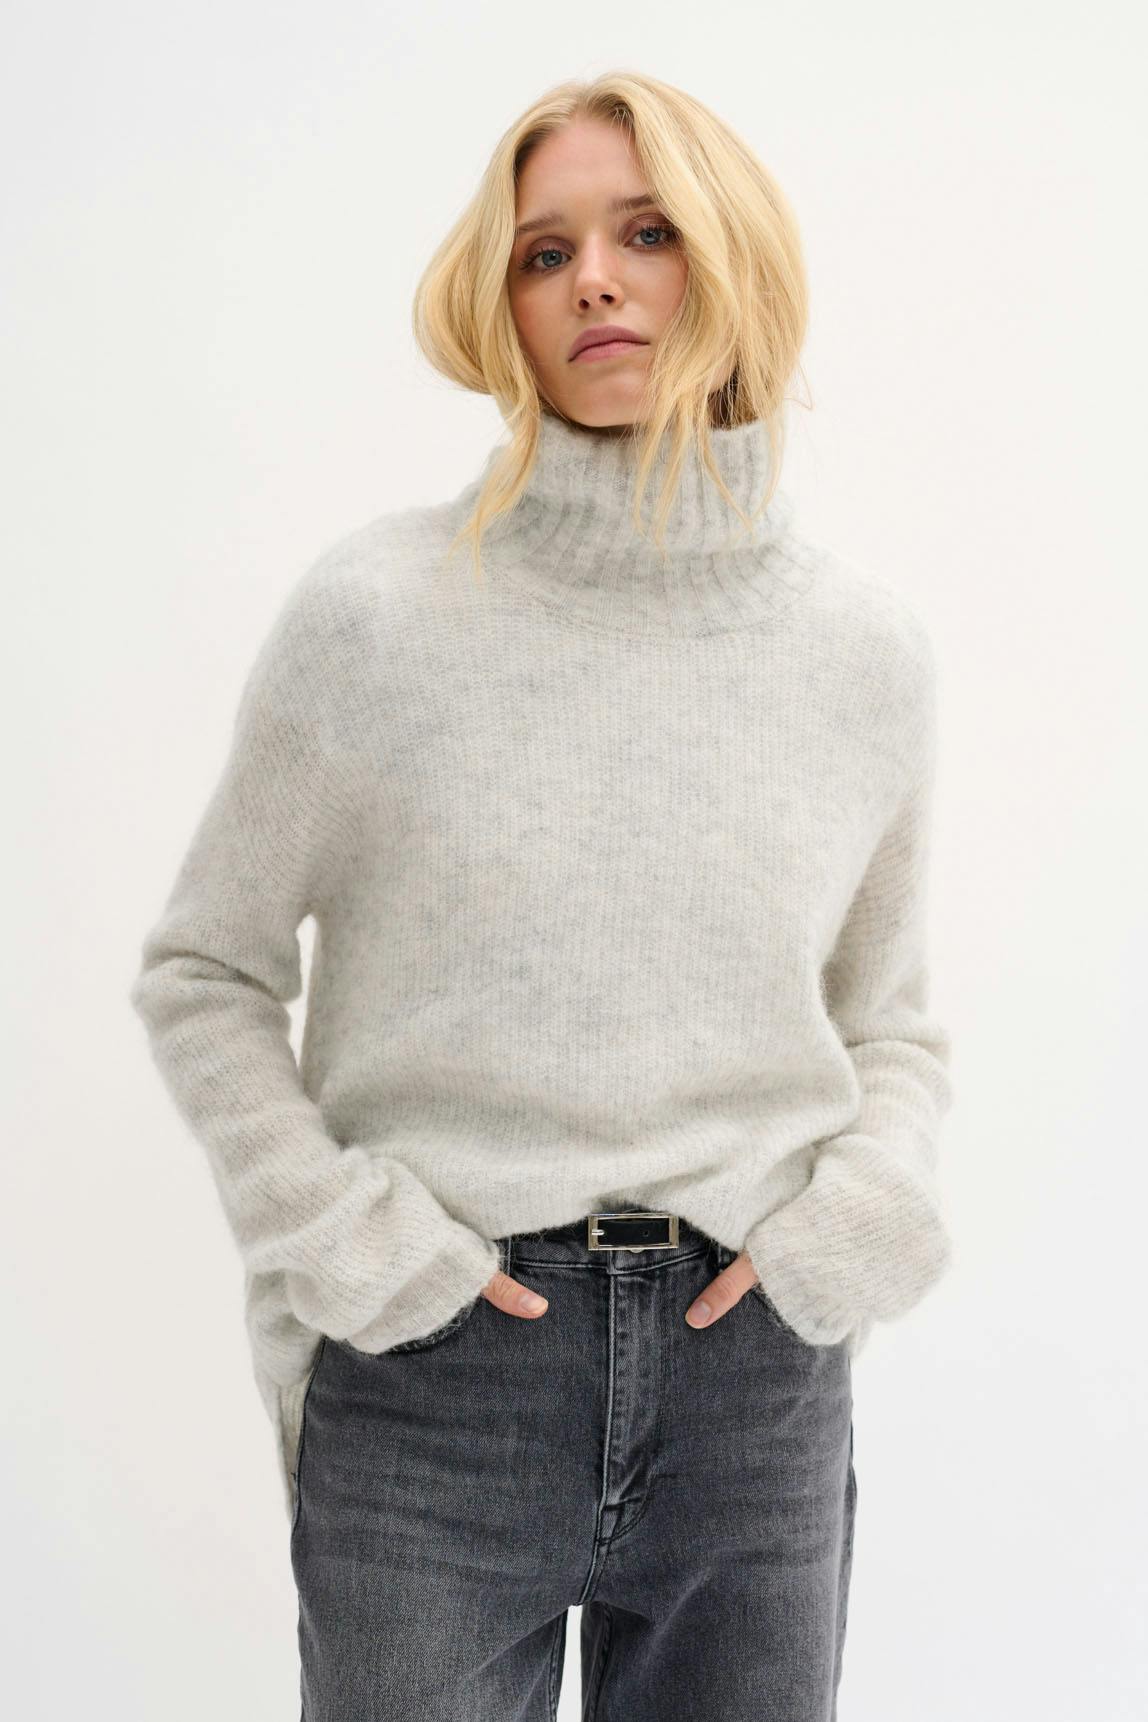 11 The knit rollneck